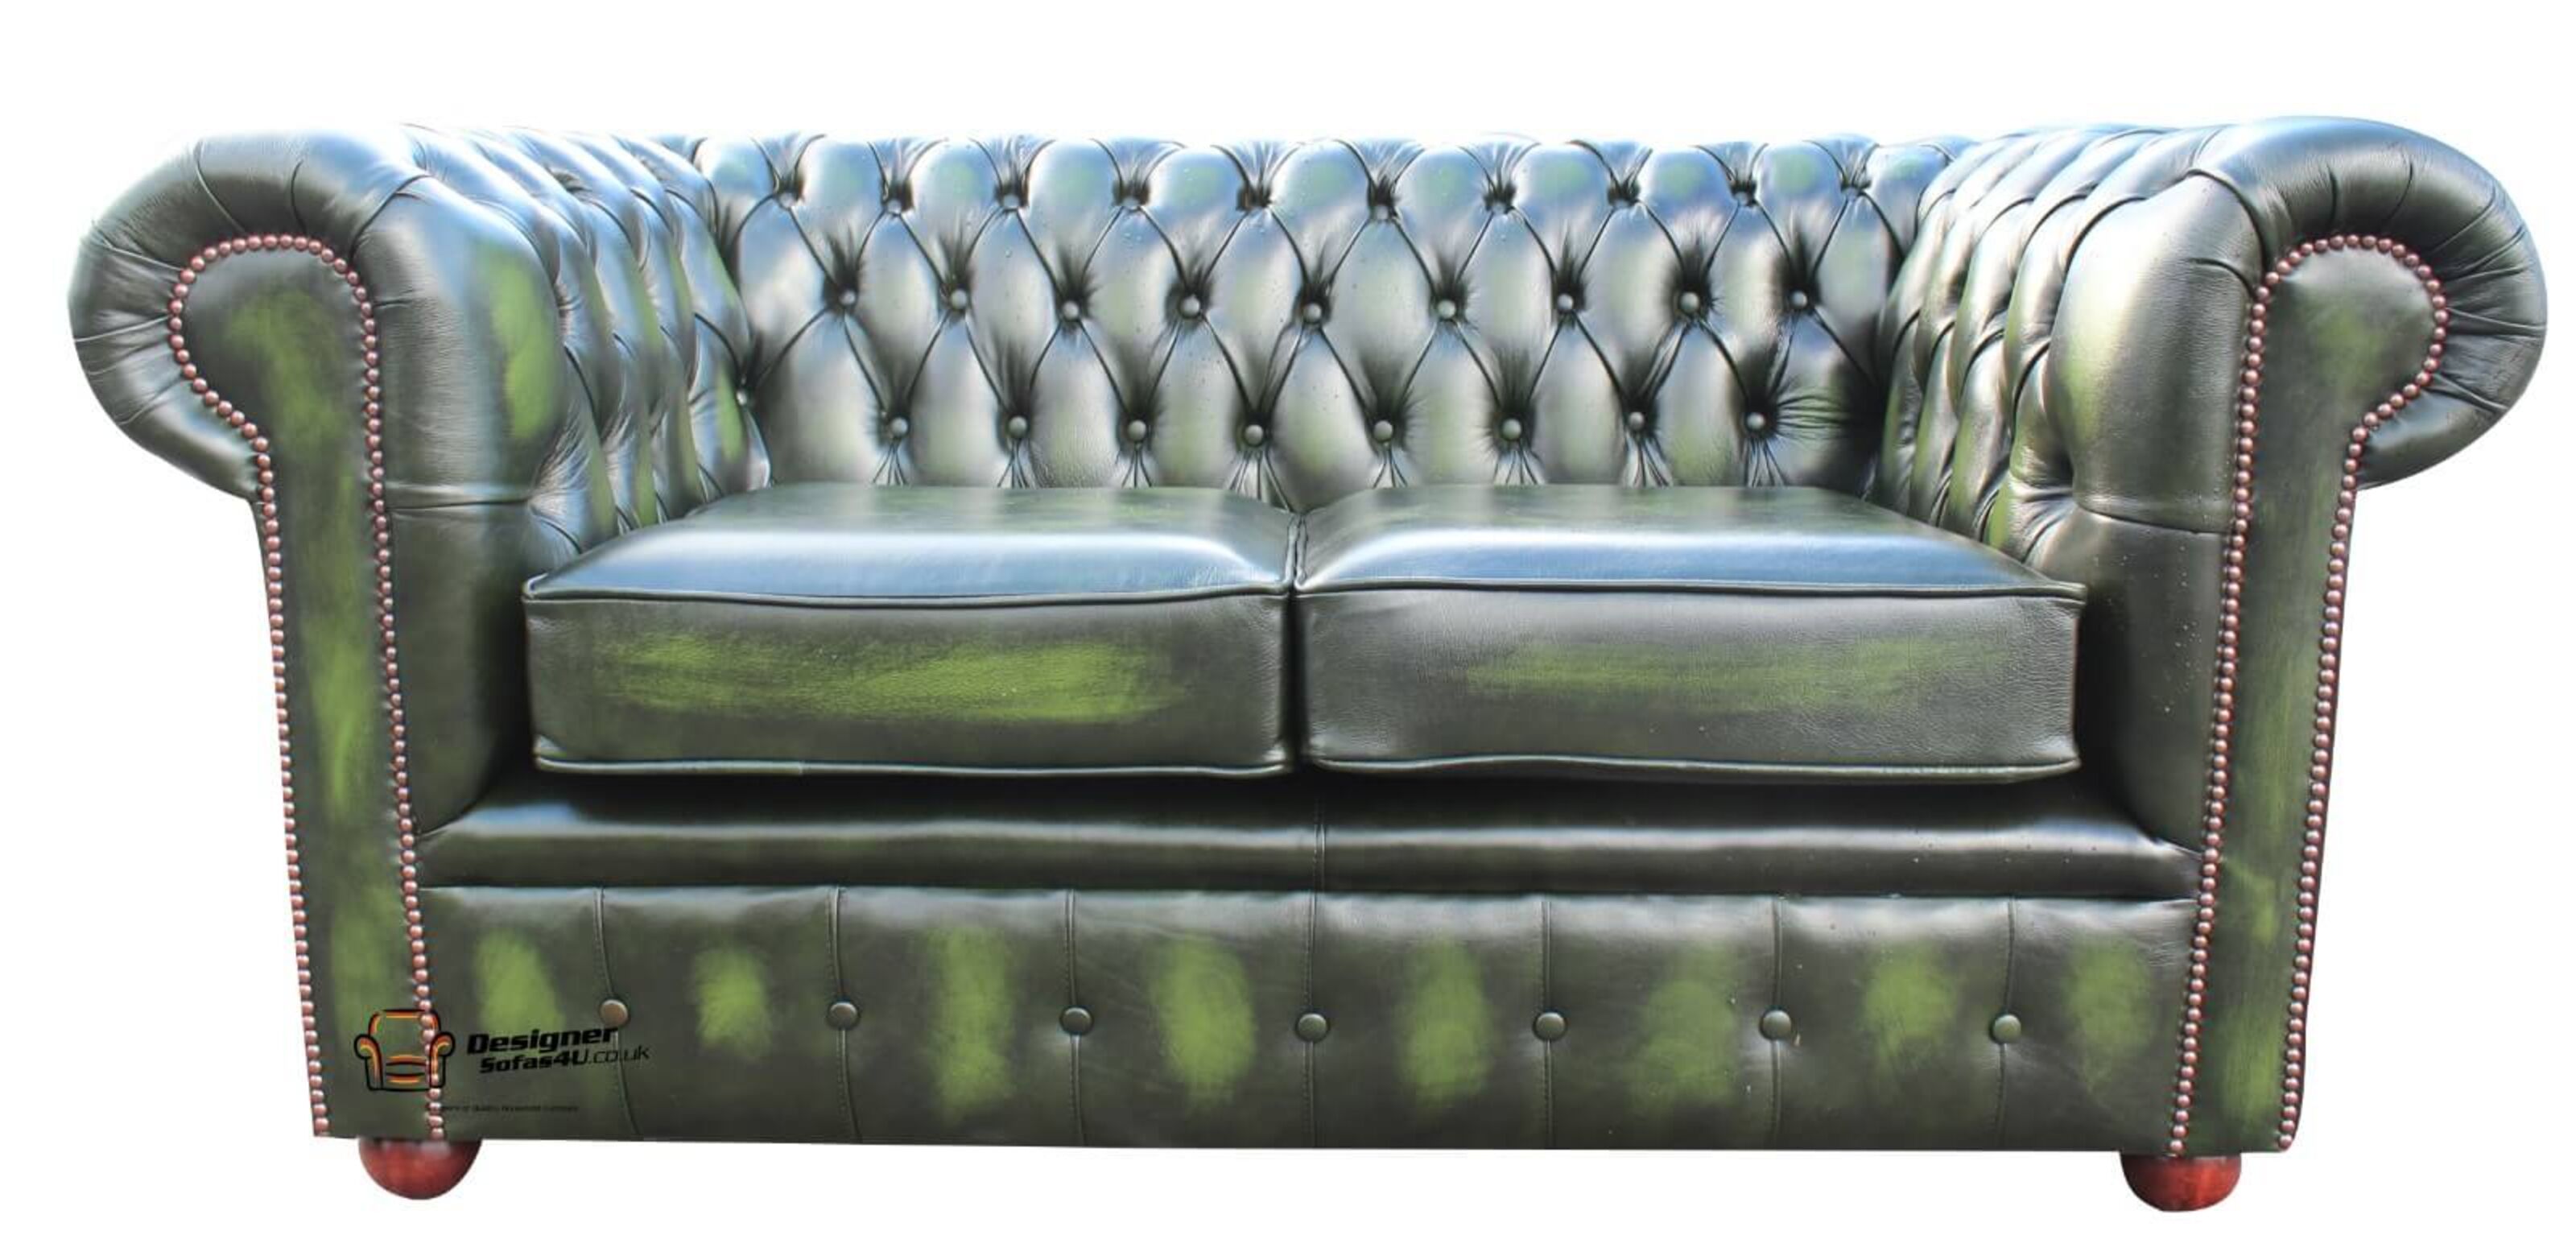 Locating Nearby Chesterfield Sofas Your Search for Style and Comfort  %Post Title